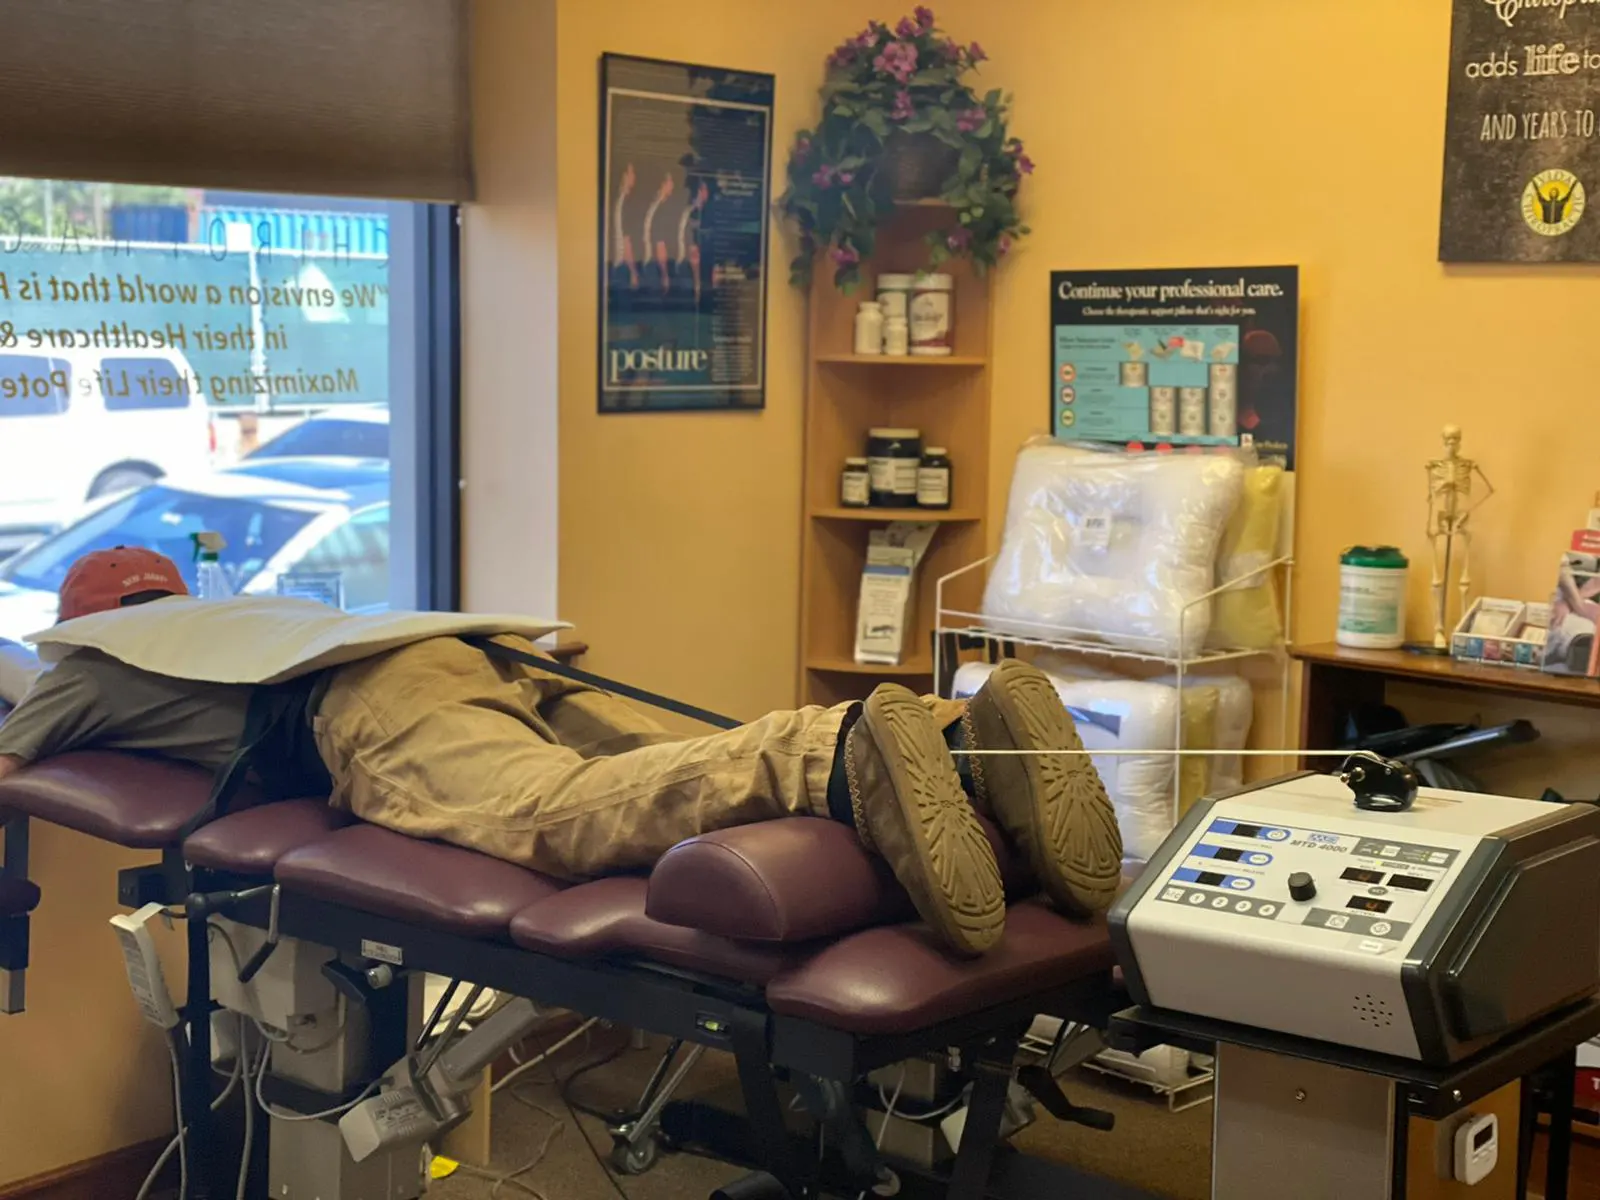 https://www.vida-chiropractic.com/images/gallery/Spinal-Decompression-slideshow-and-COB-and-gallery-7.webp